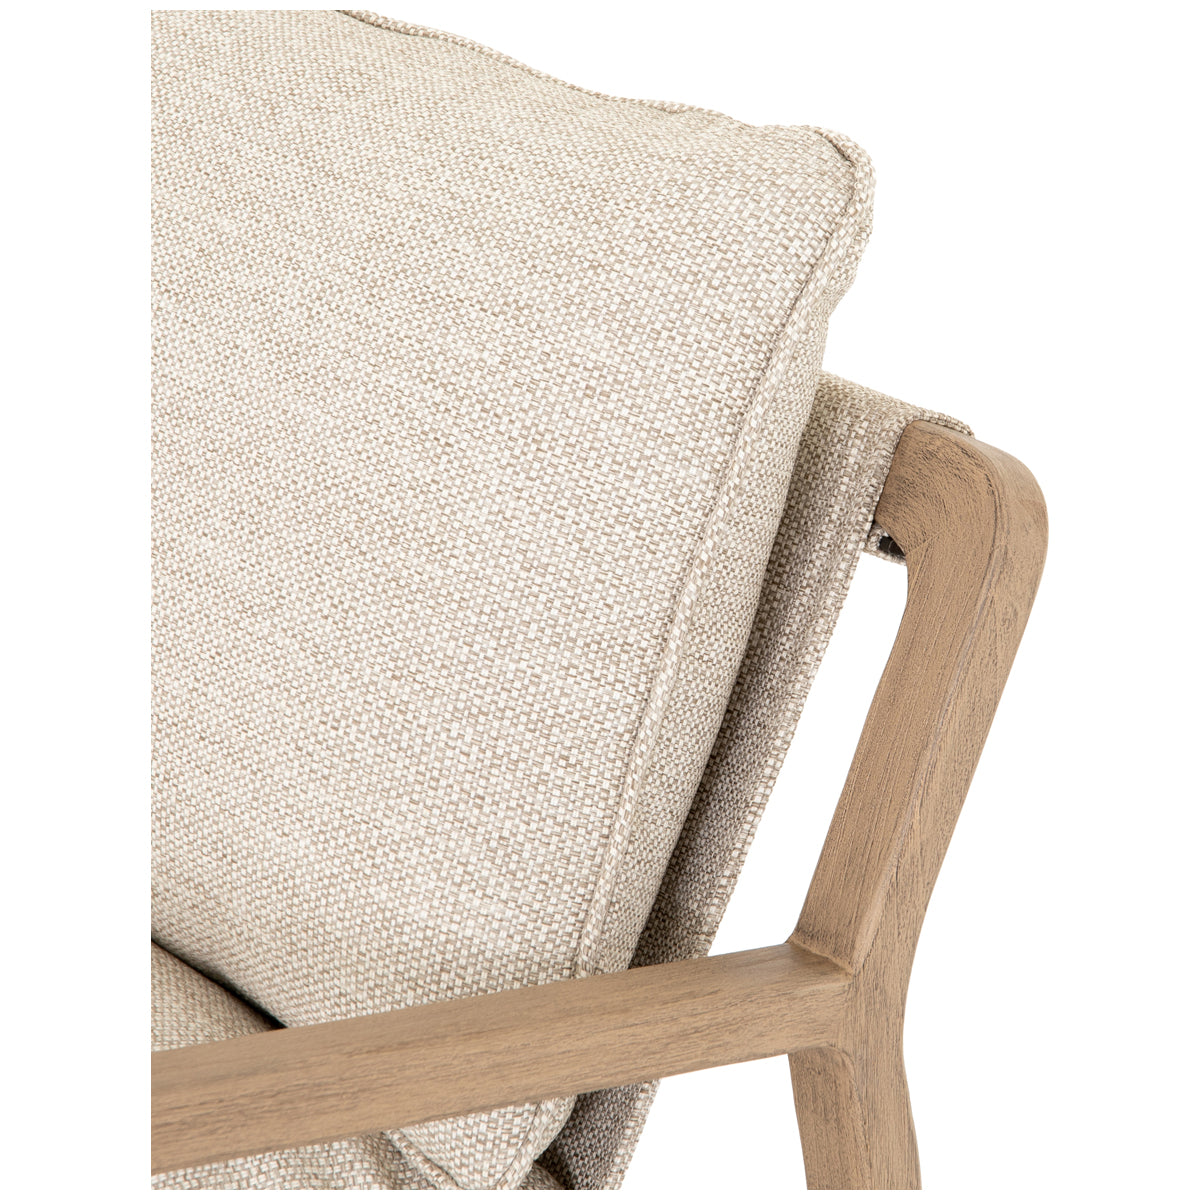 Four Hands Solano Lane Outdoor Chair